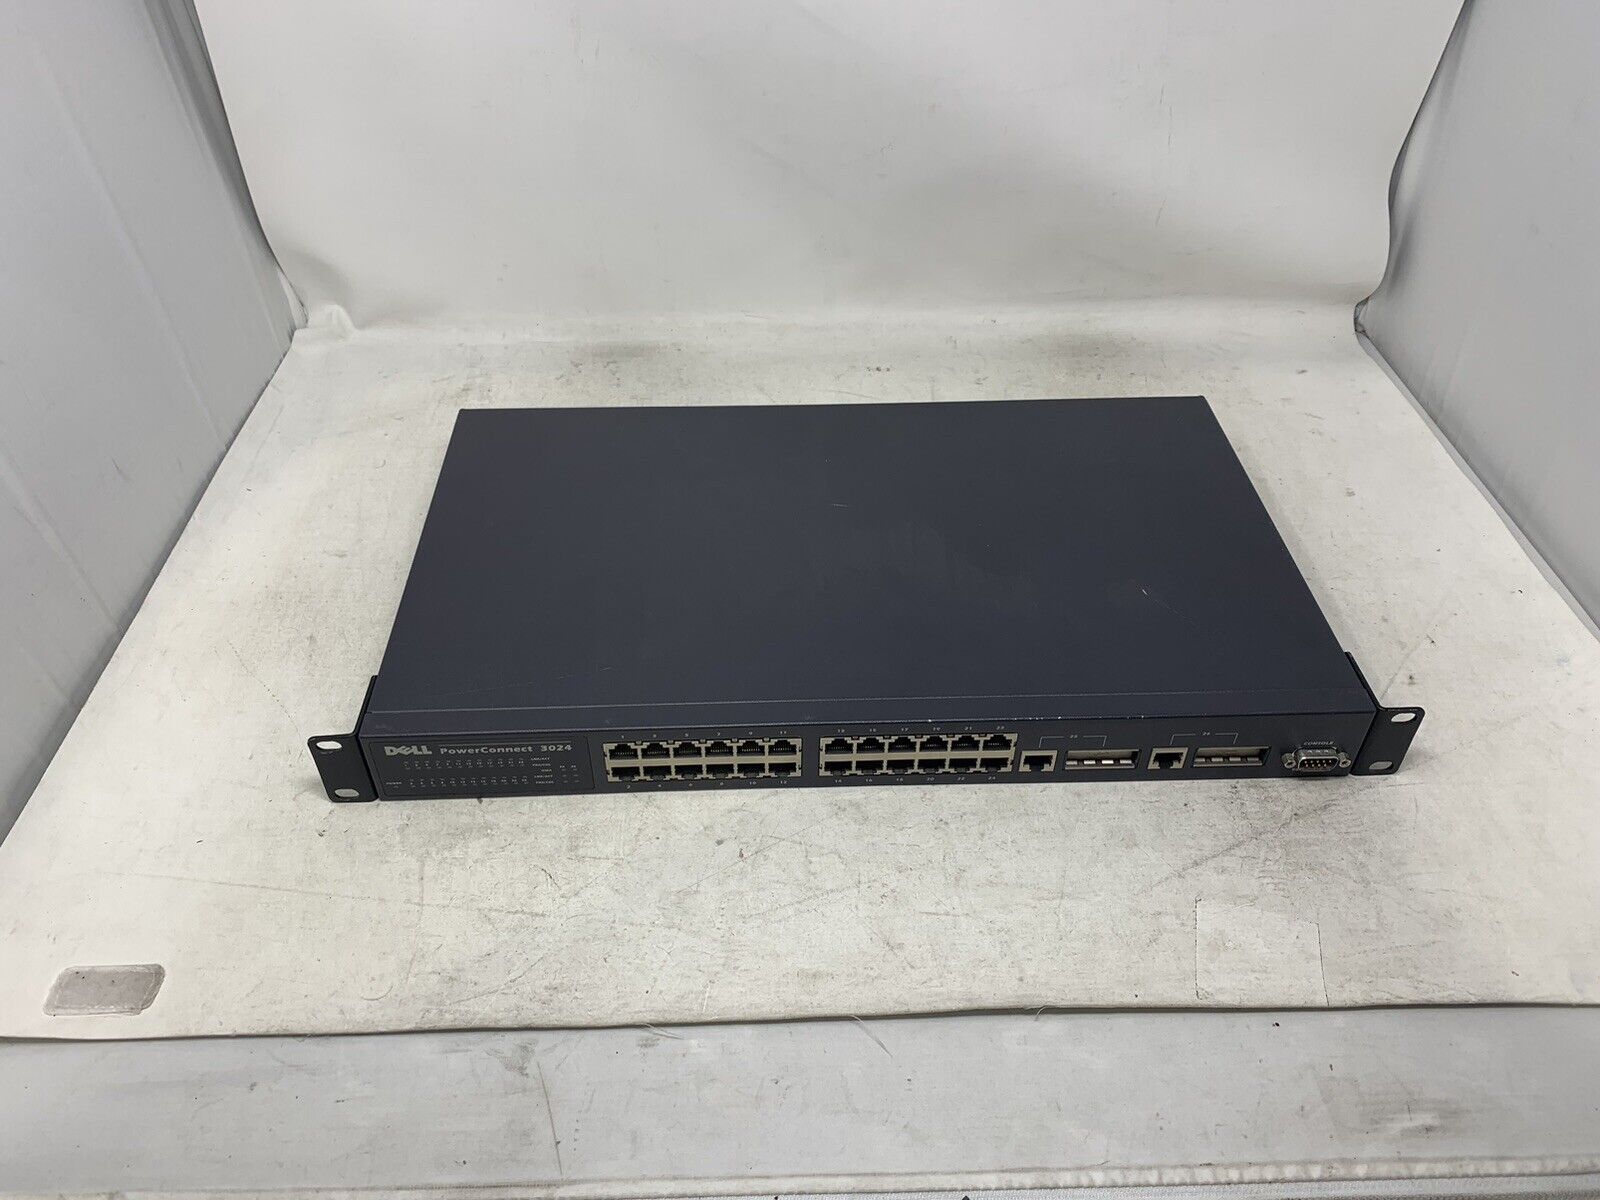 Dell PowerConnect 3024 - 24 Port Fast Ethernet Switch With 2 SFP+ Ports 52224F2